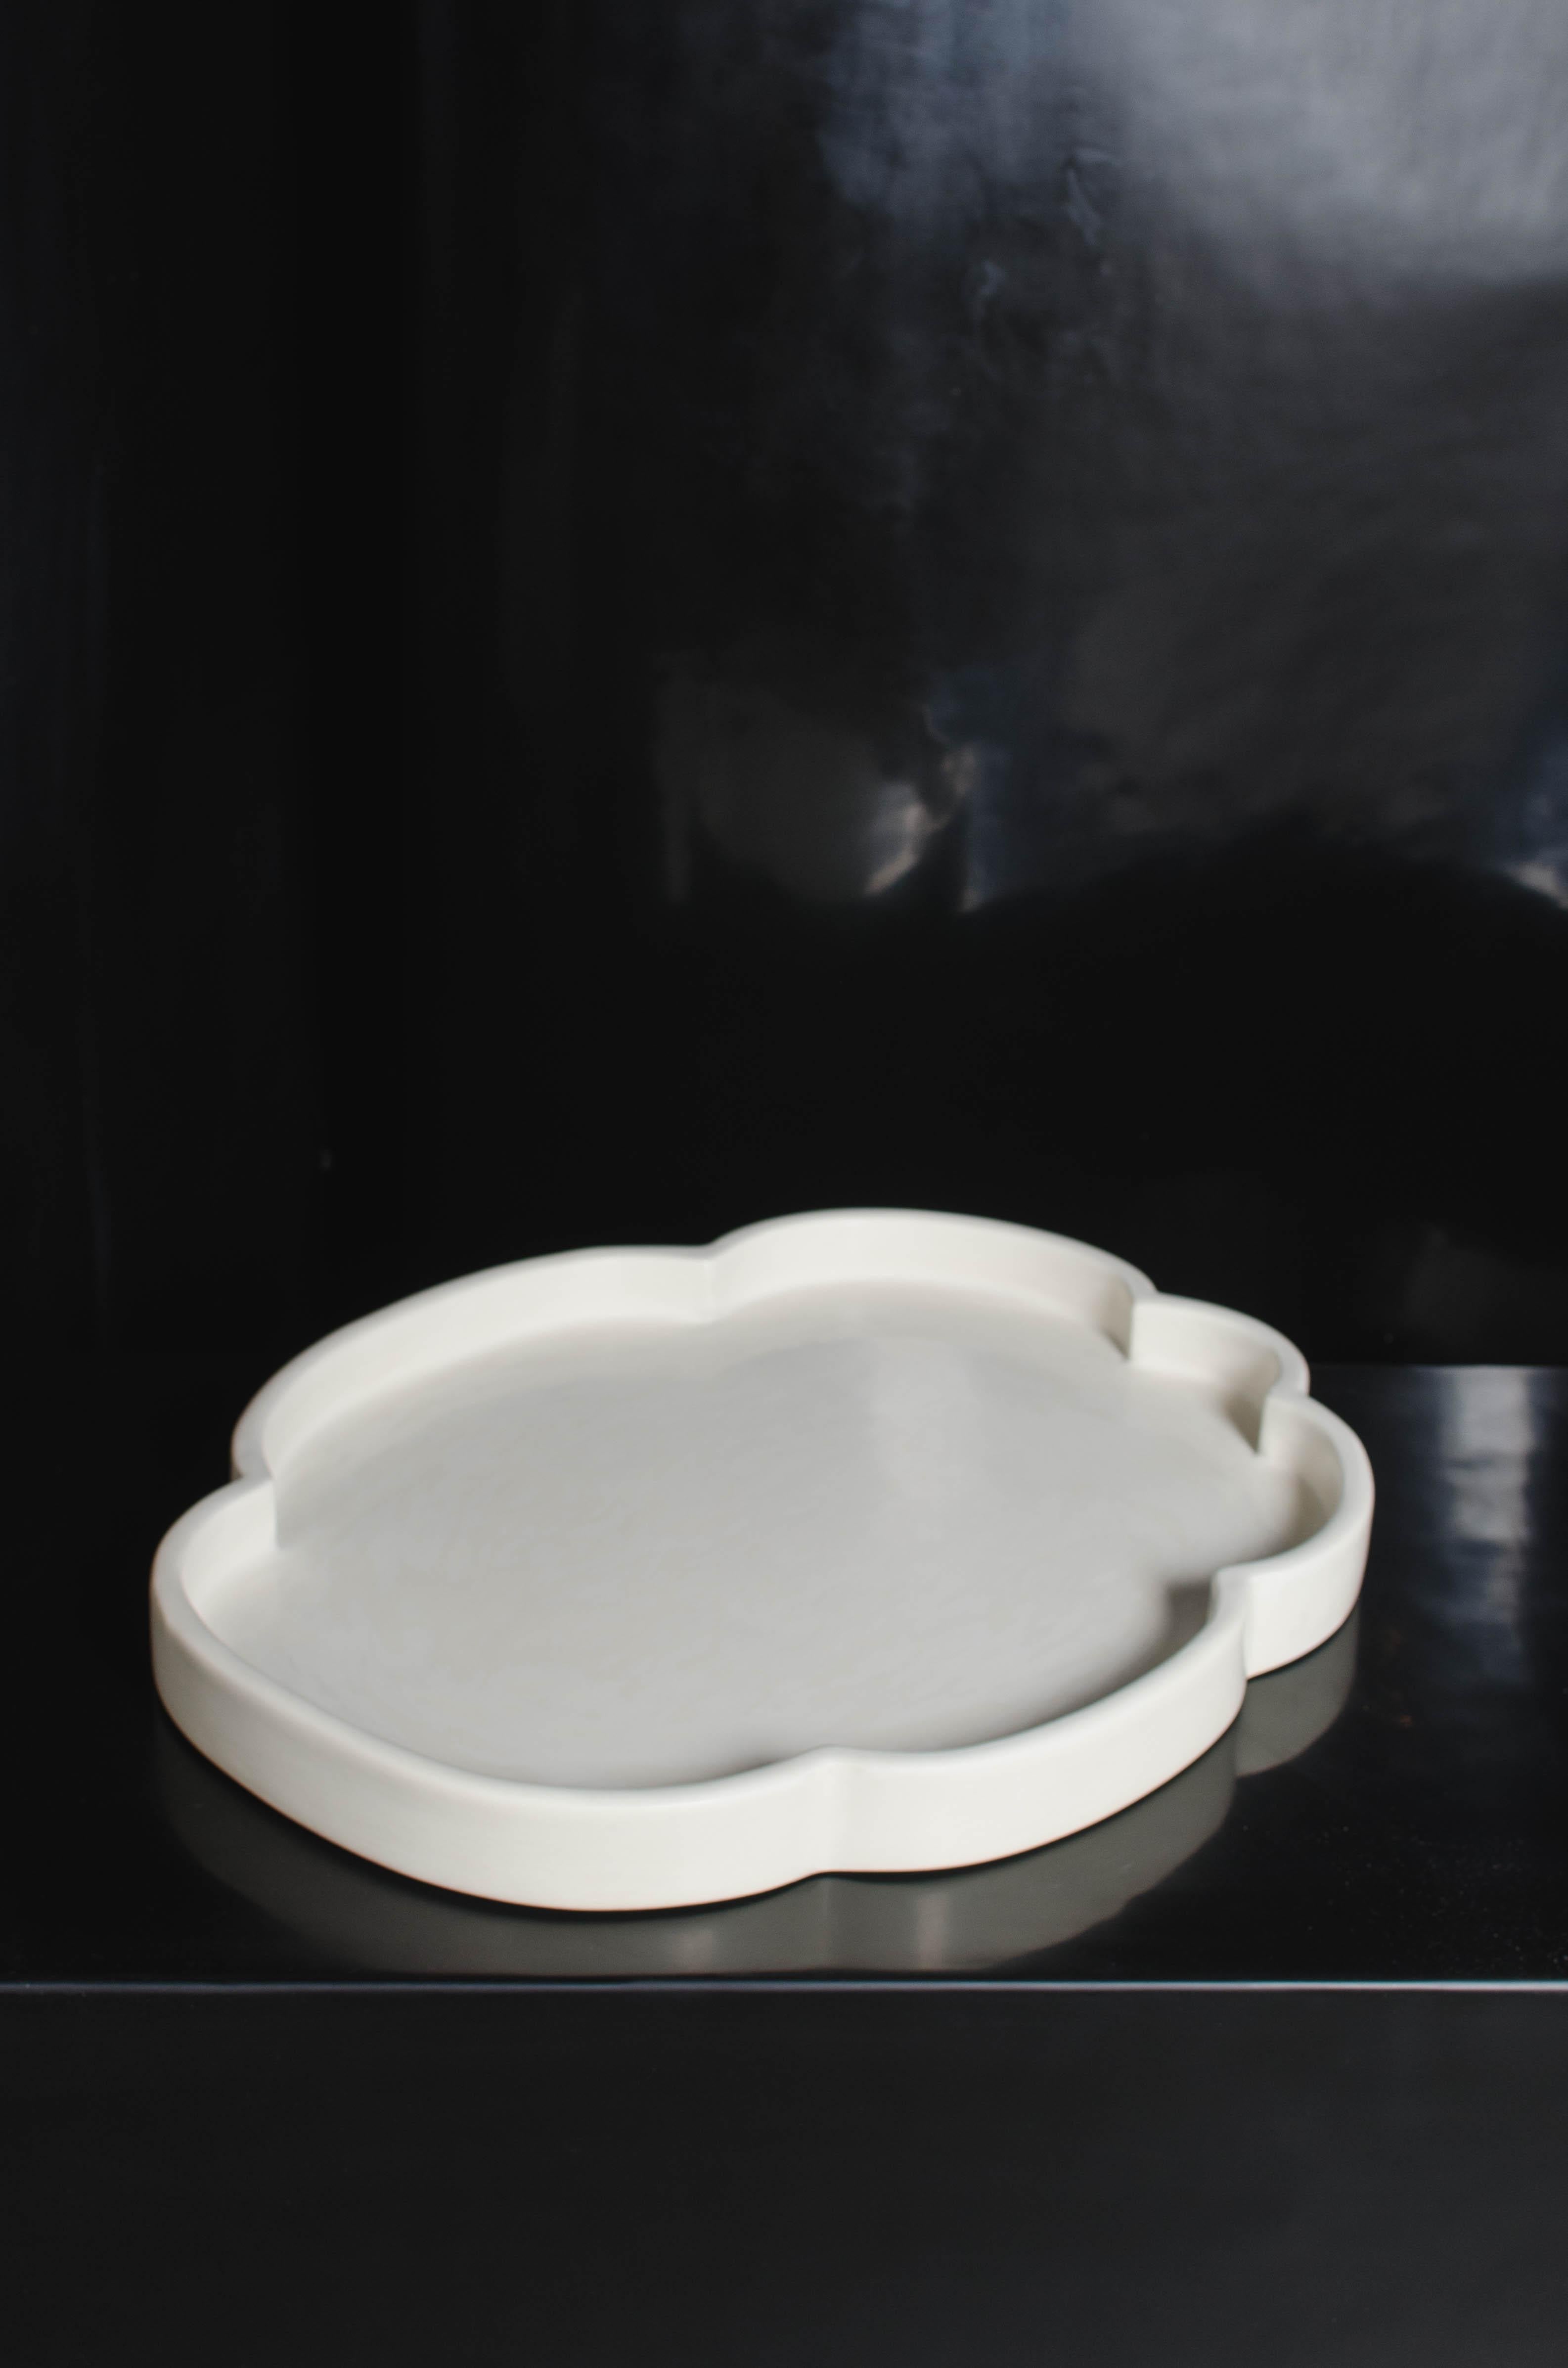 Repoussé Contemporary Cream Lacquer Cloud Design Tray by Robert Kuo, Limited Edition For Sale